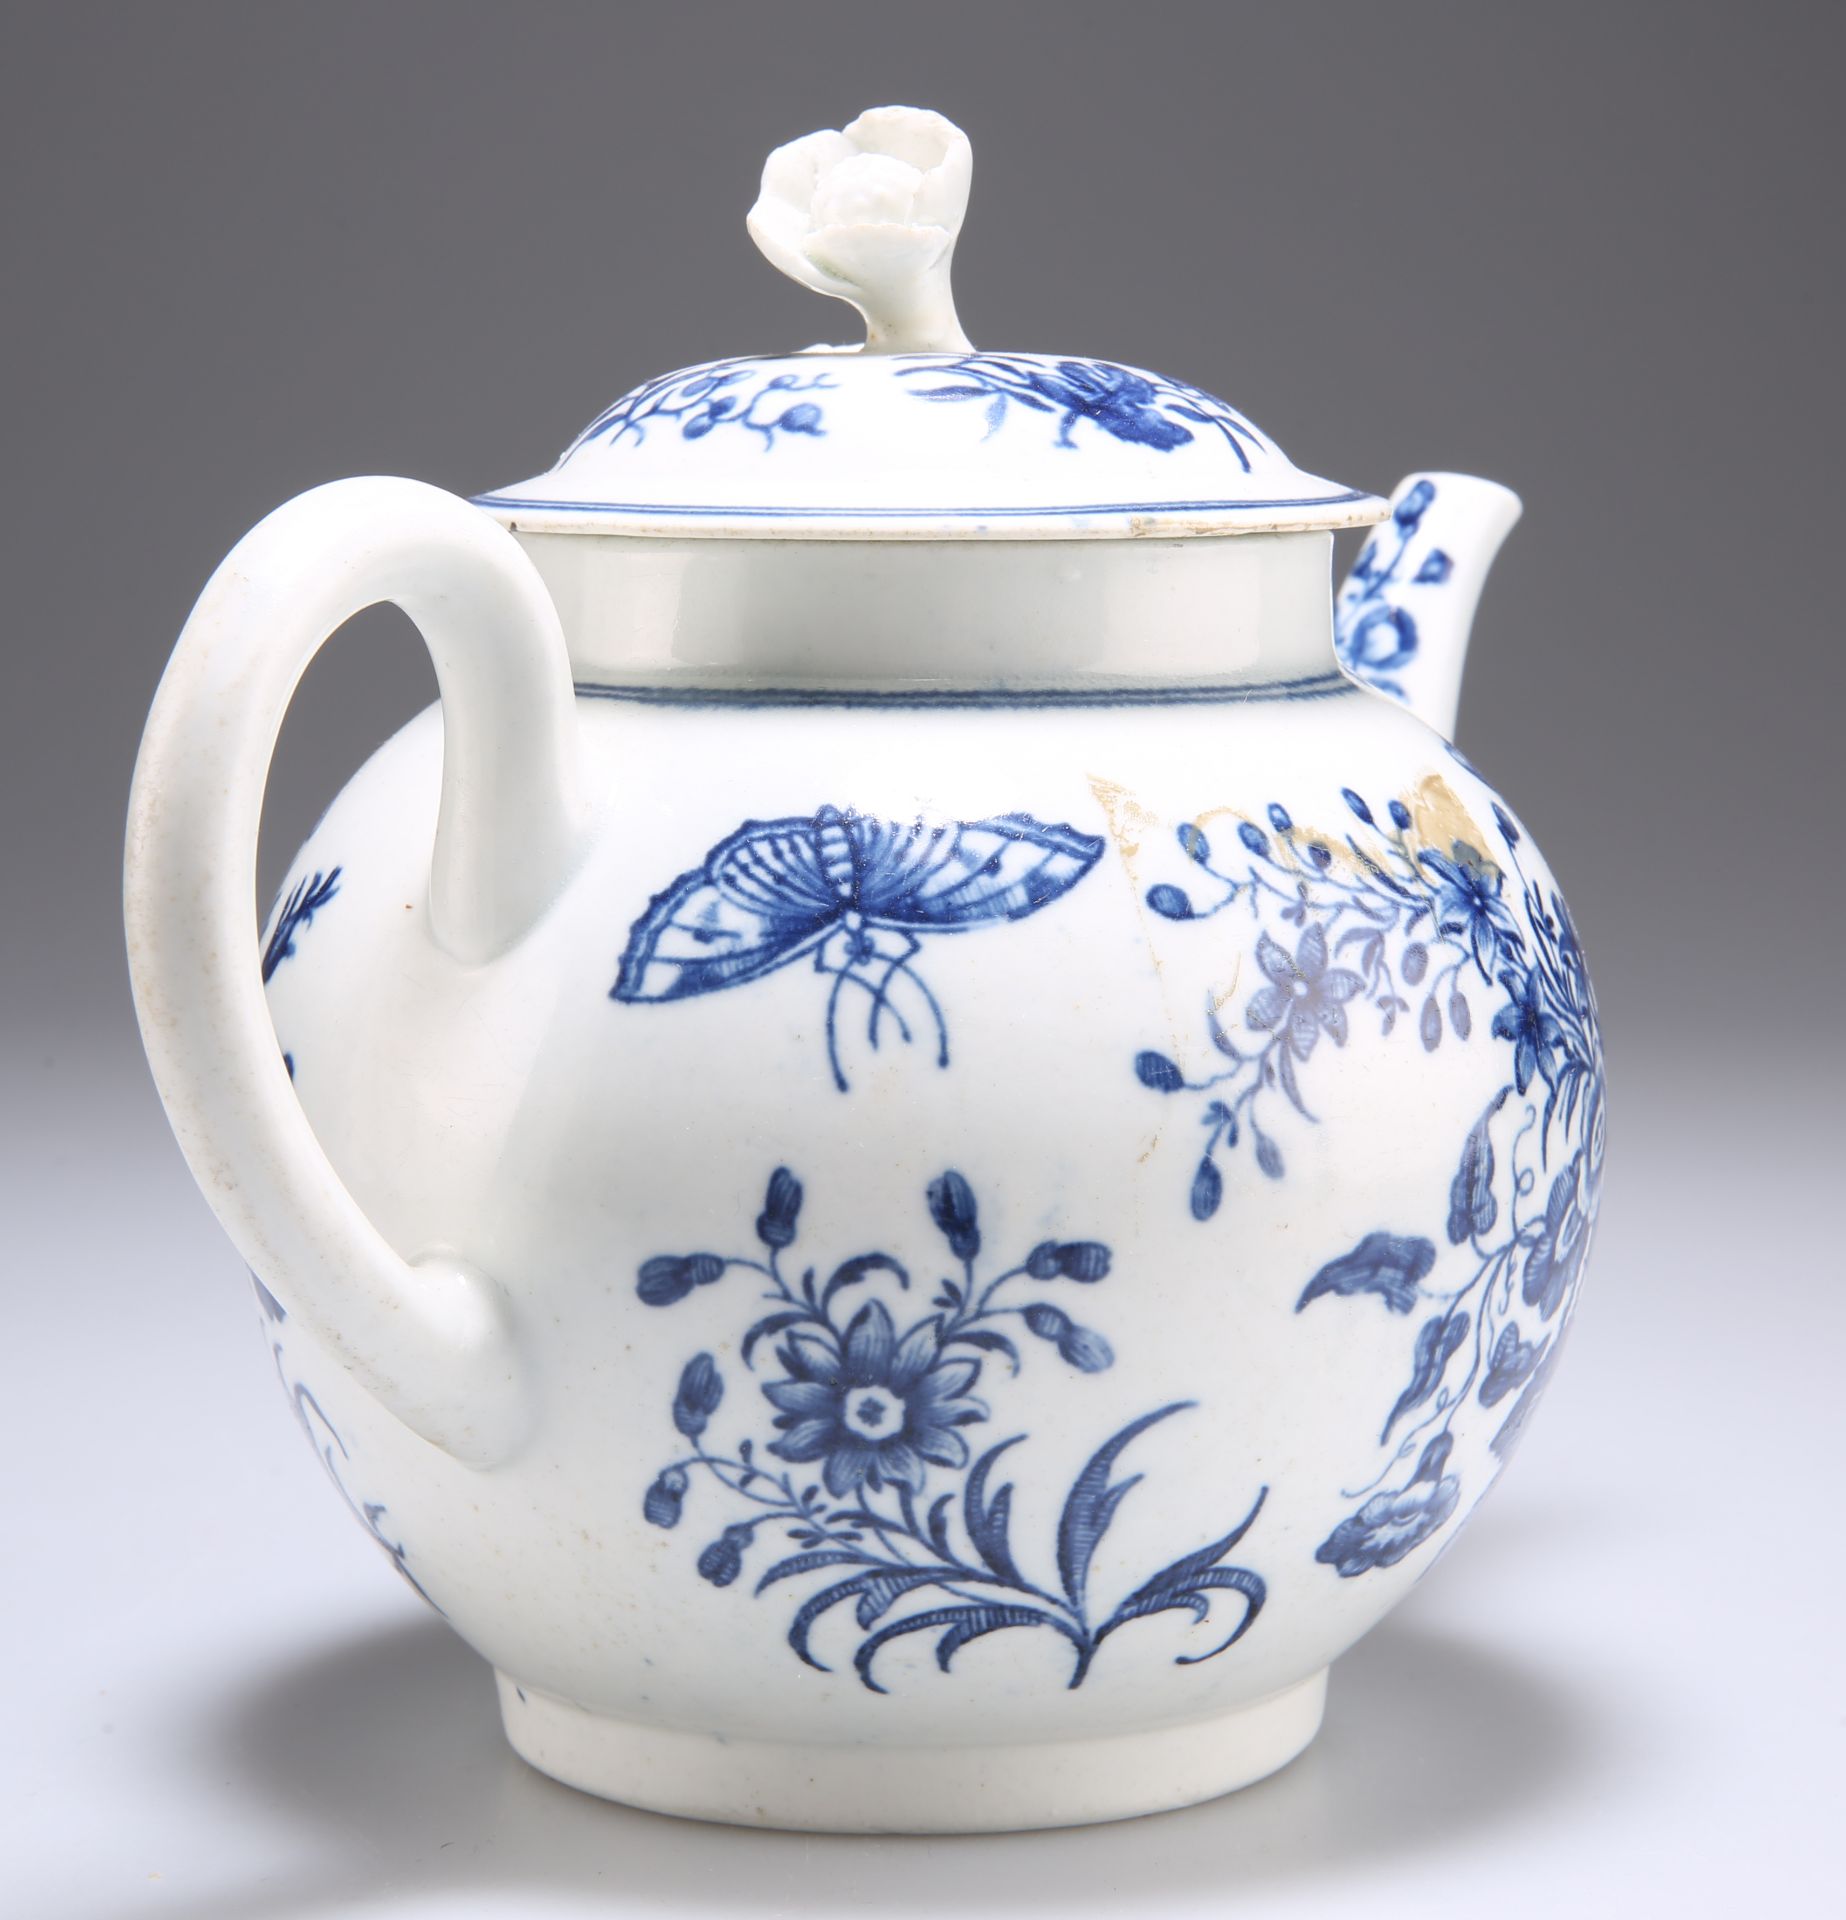 A WORCESTER BLUE AND WHITE PORCELAIN TEAPOT, CIRCA 1770 - Image 3 of 3